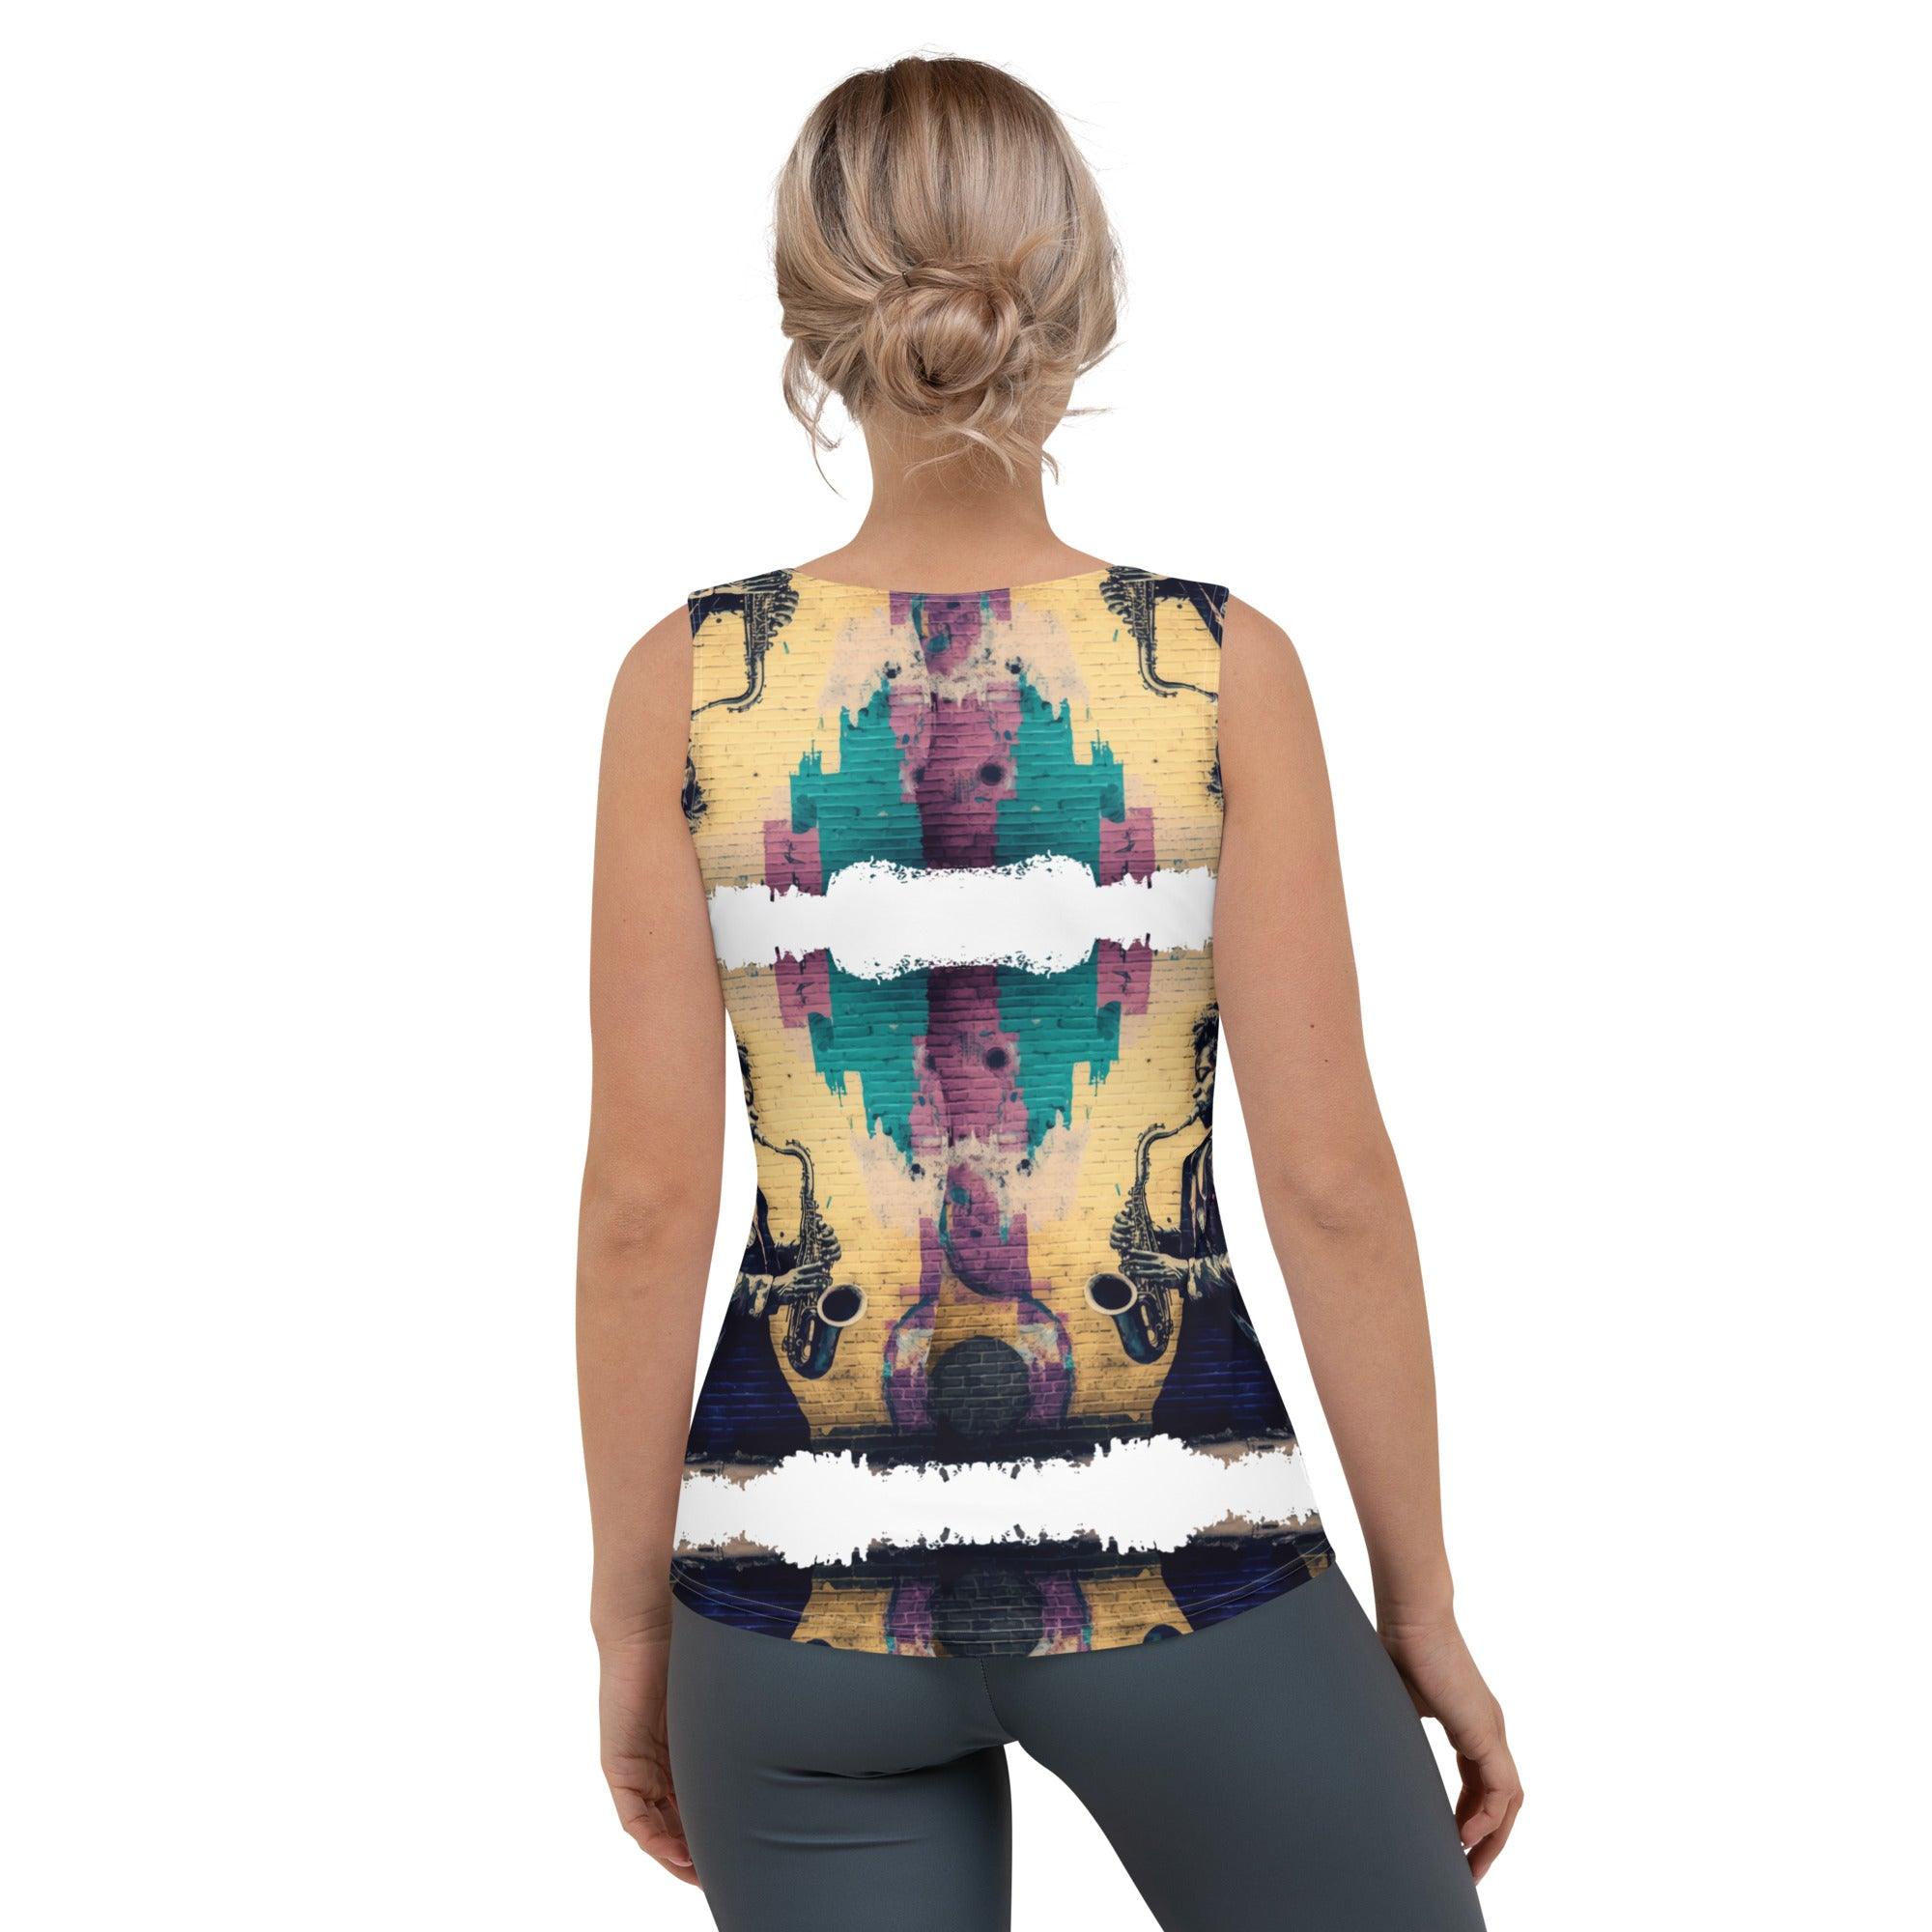 Blowin' Up A Storm Sublimation Cut & Sew Tank Top - Beyond T-shirts